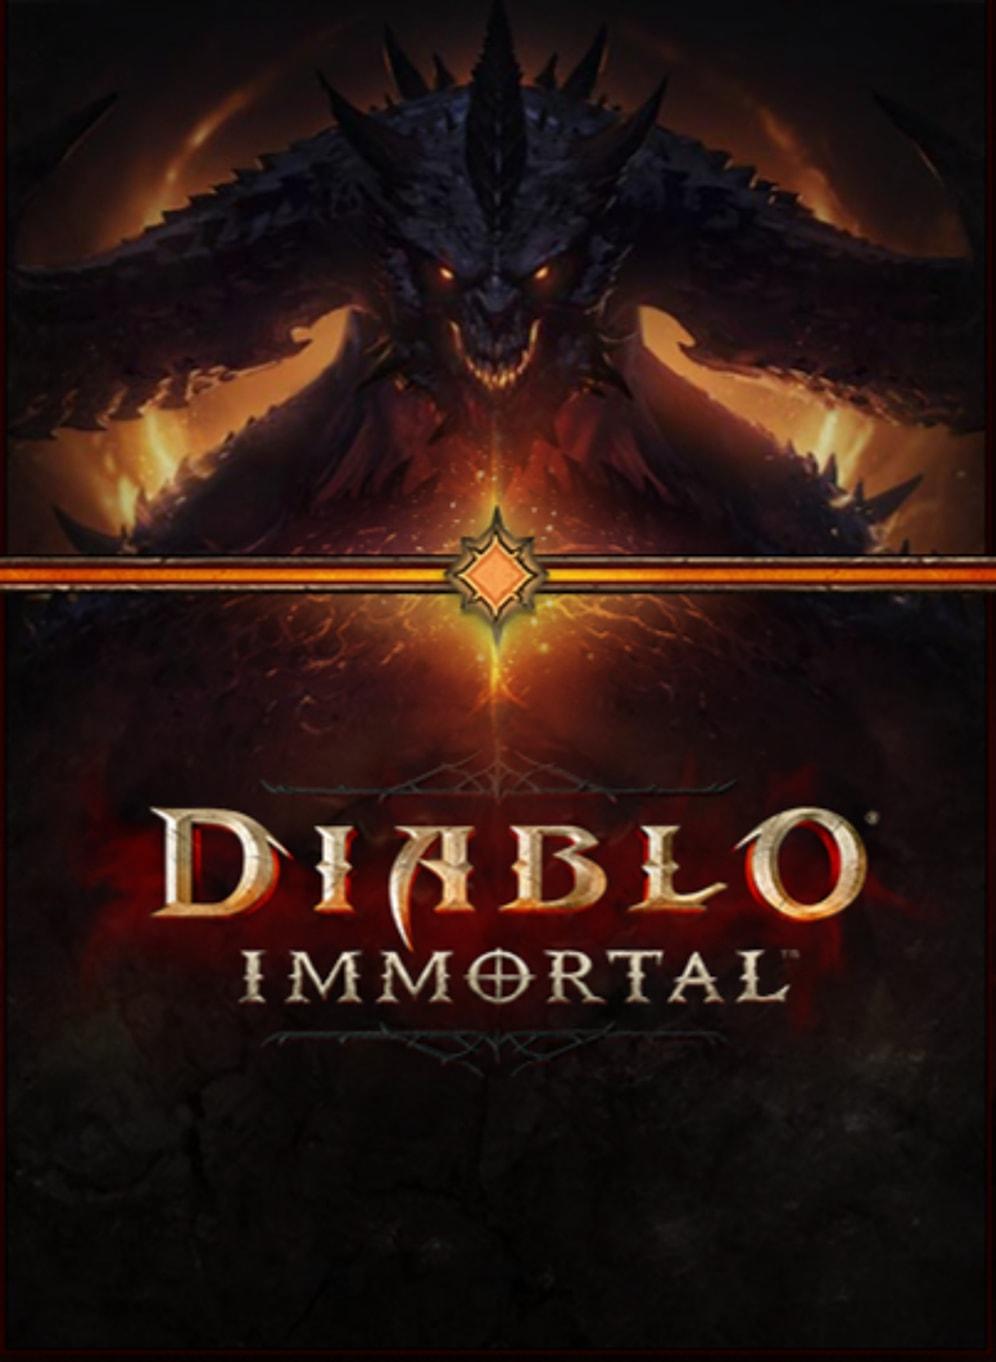 Diablo: Immortal No Longer Requires Real Money to Access End-Game Content